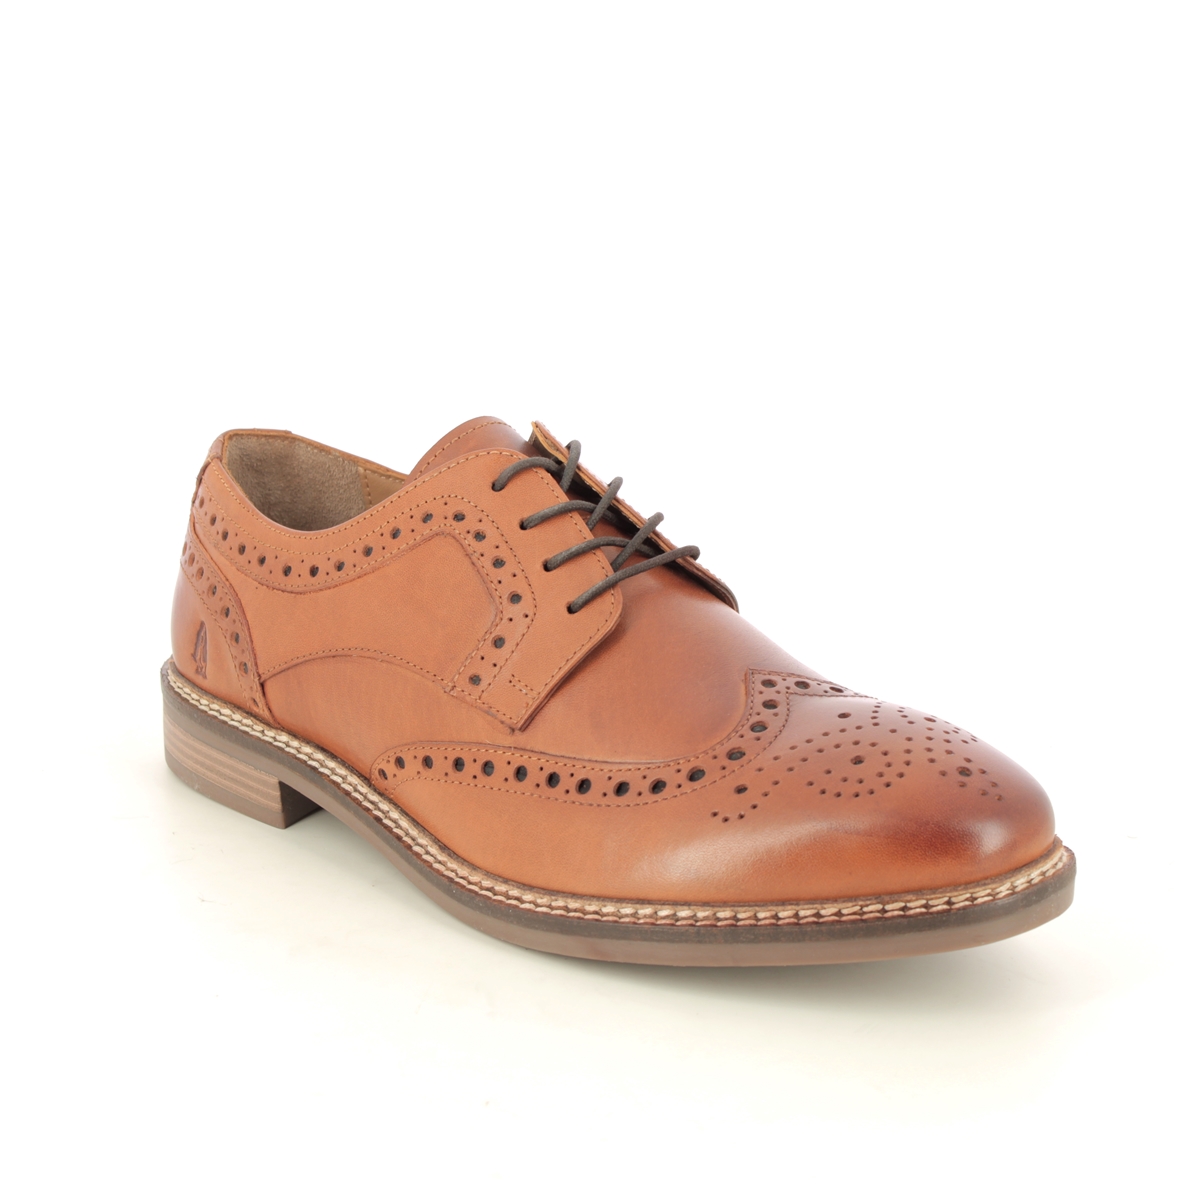 Hush Puppies - Bryson (Tan Leather ) 12355-11 In Size 11 In Plain Tan Leather